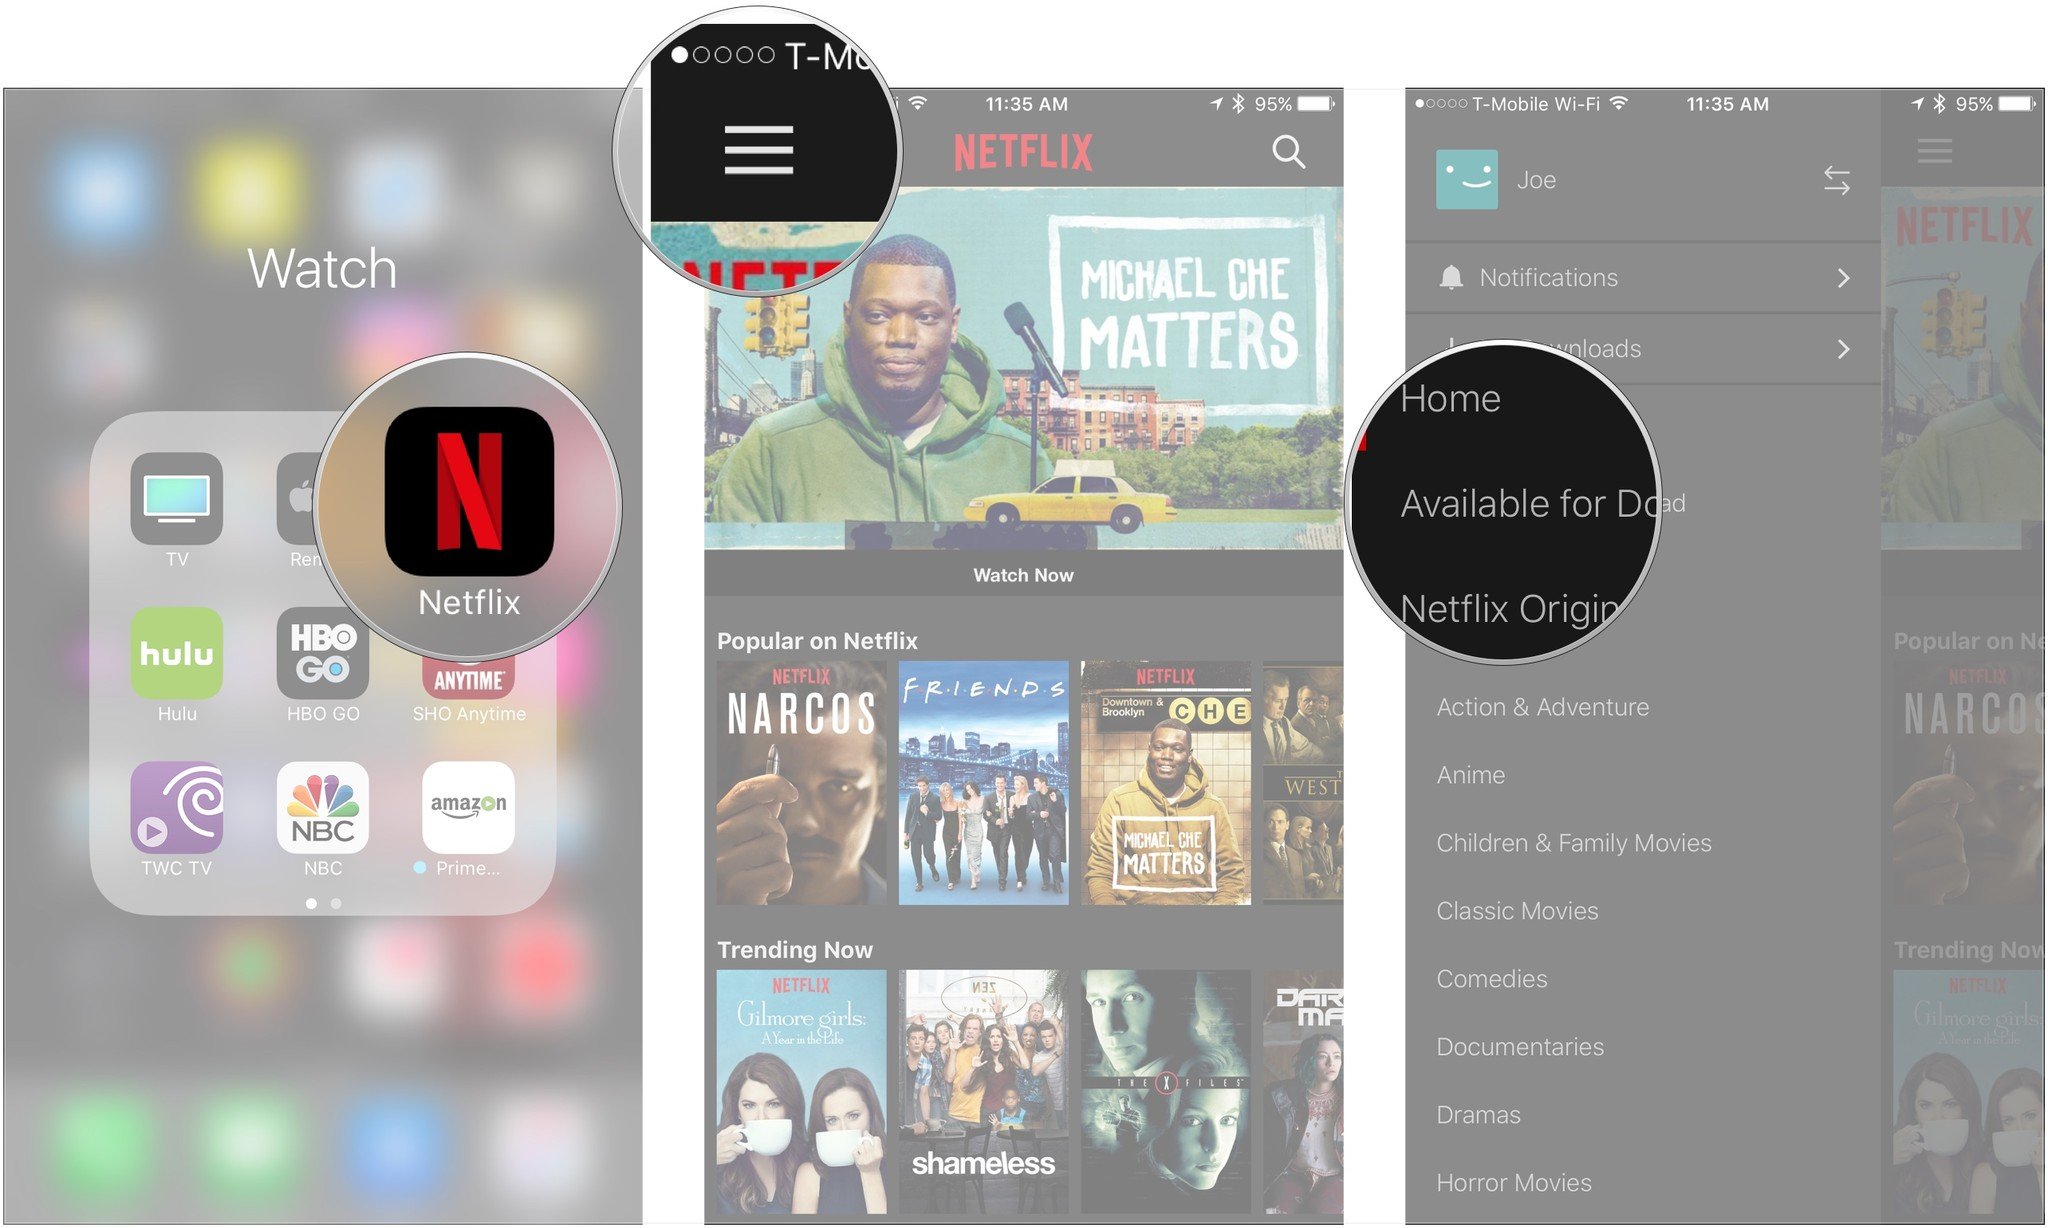 Open Netflix, tap menu, tap Available for Downloads